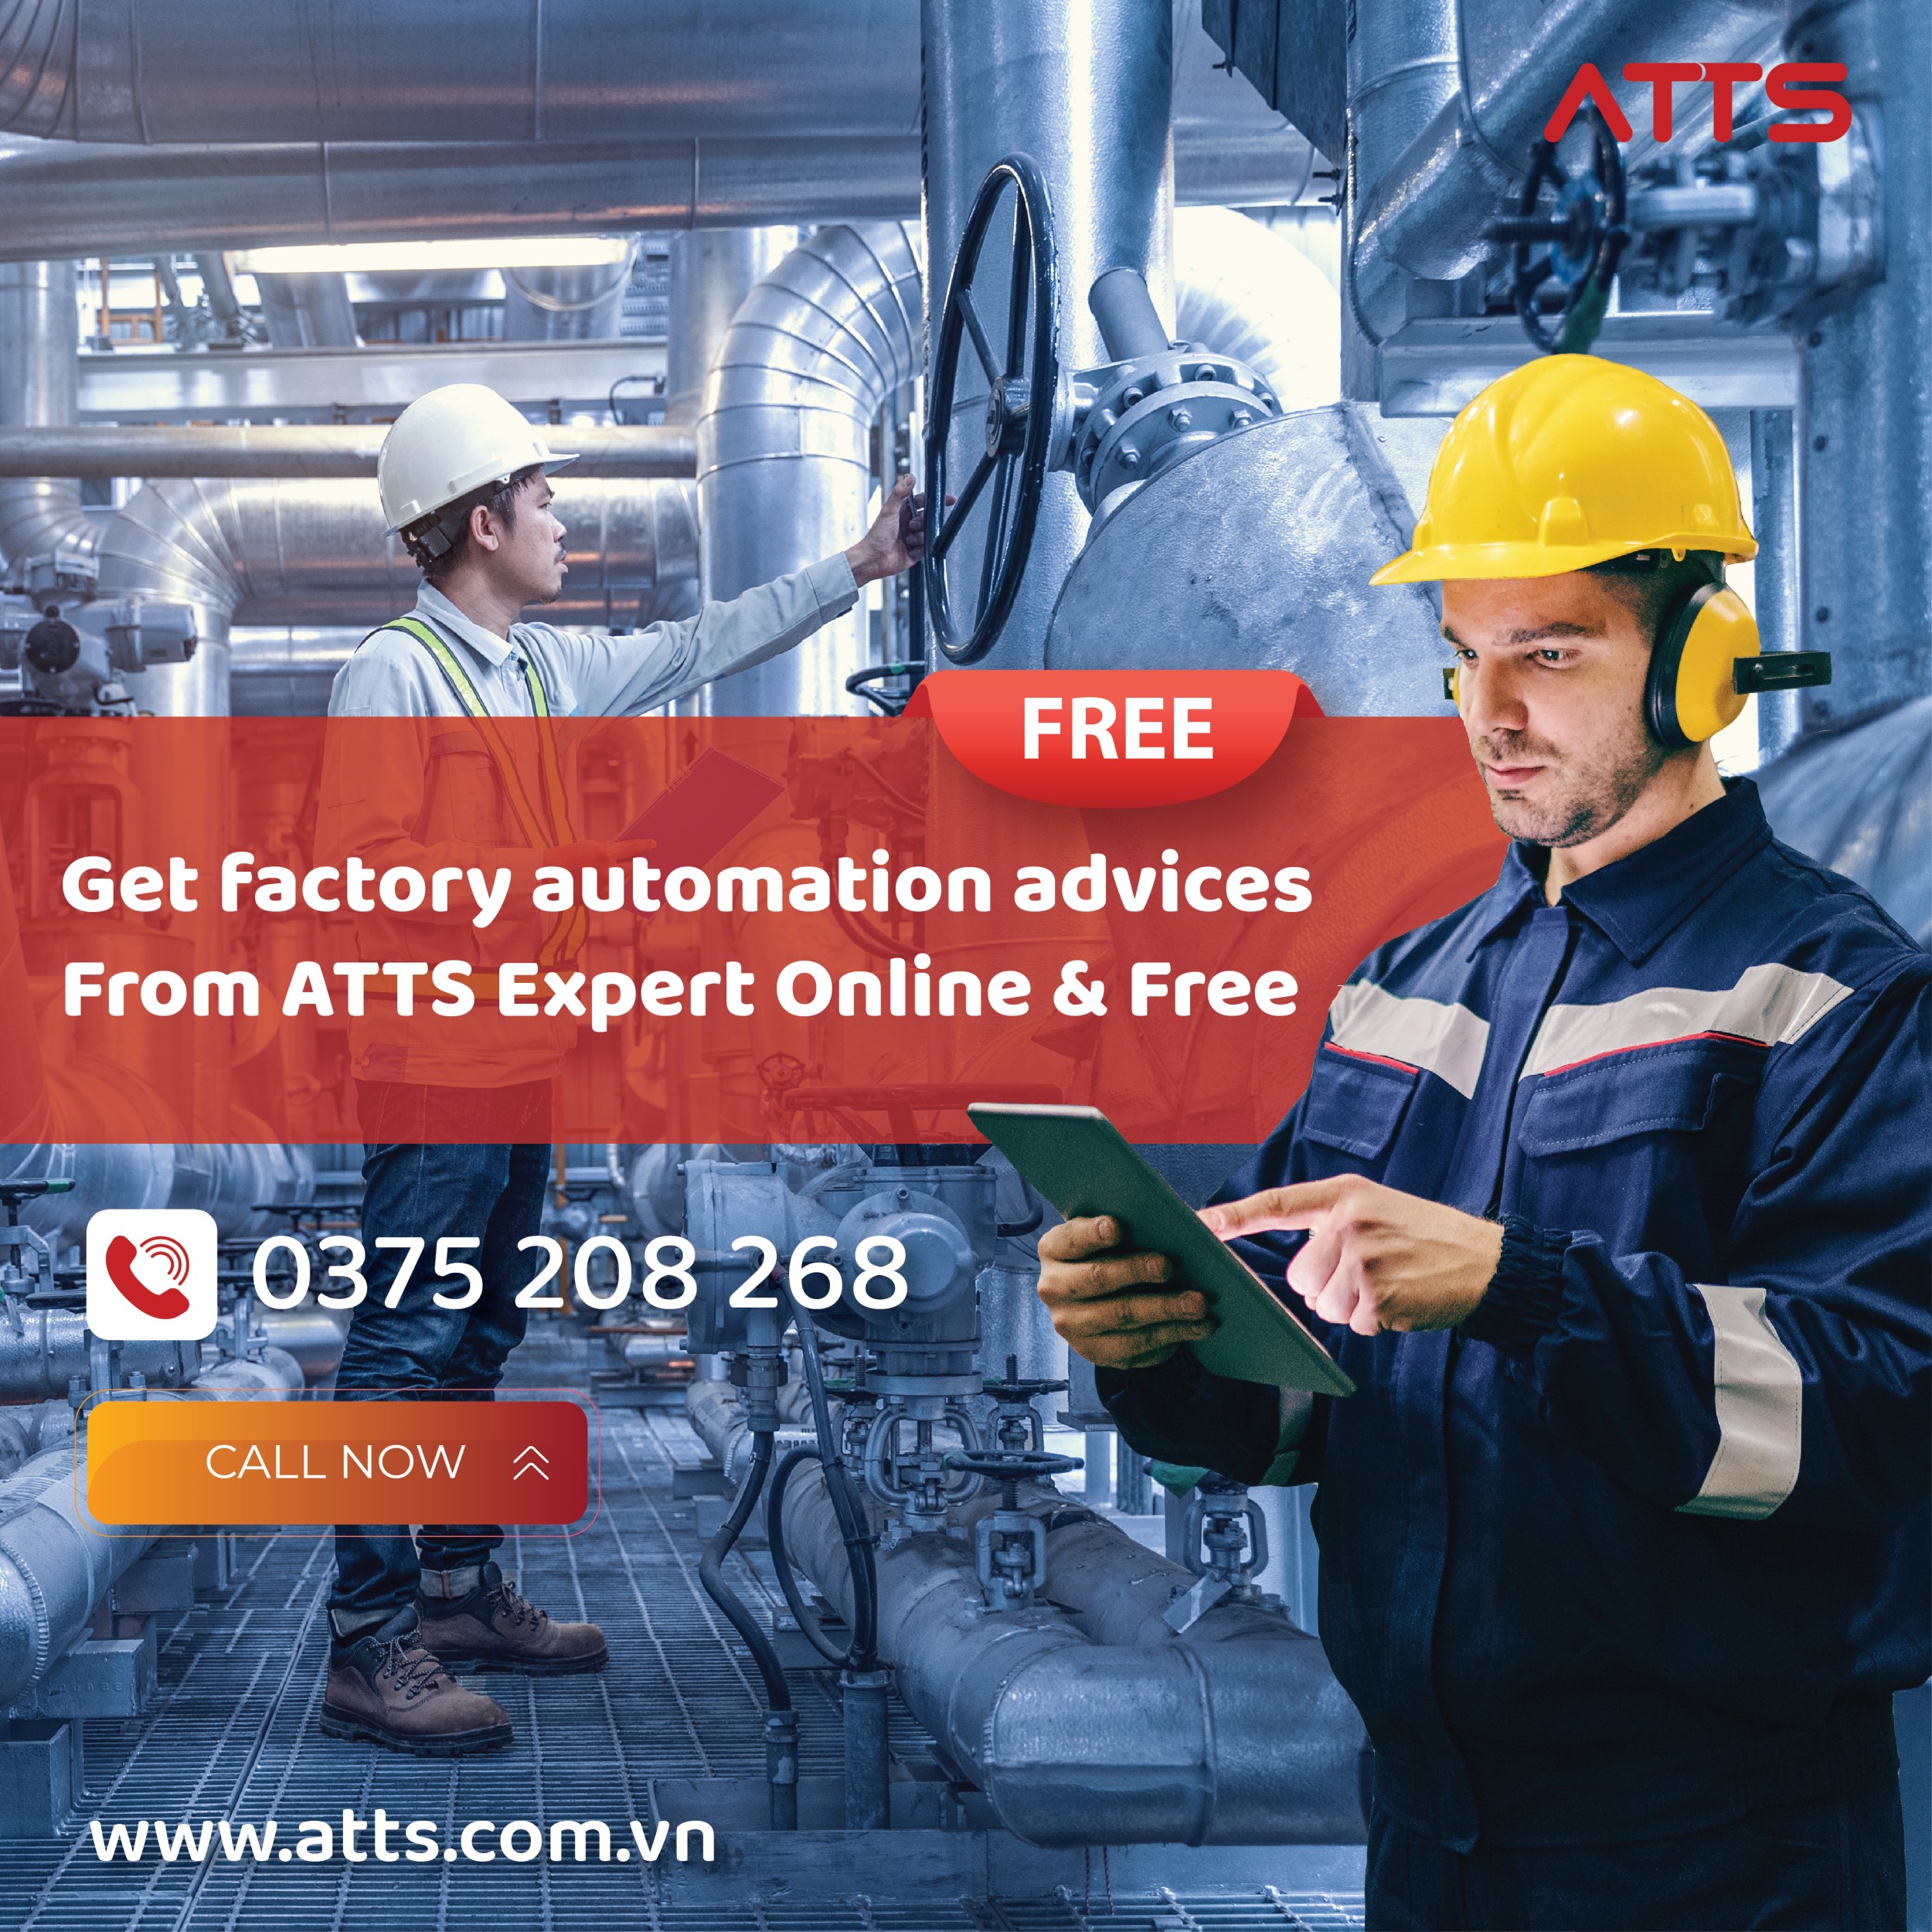 Free consultation on factory automation and digitization with leading automation experts has never been so simple.